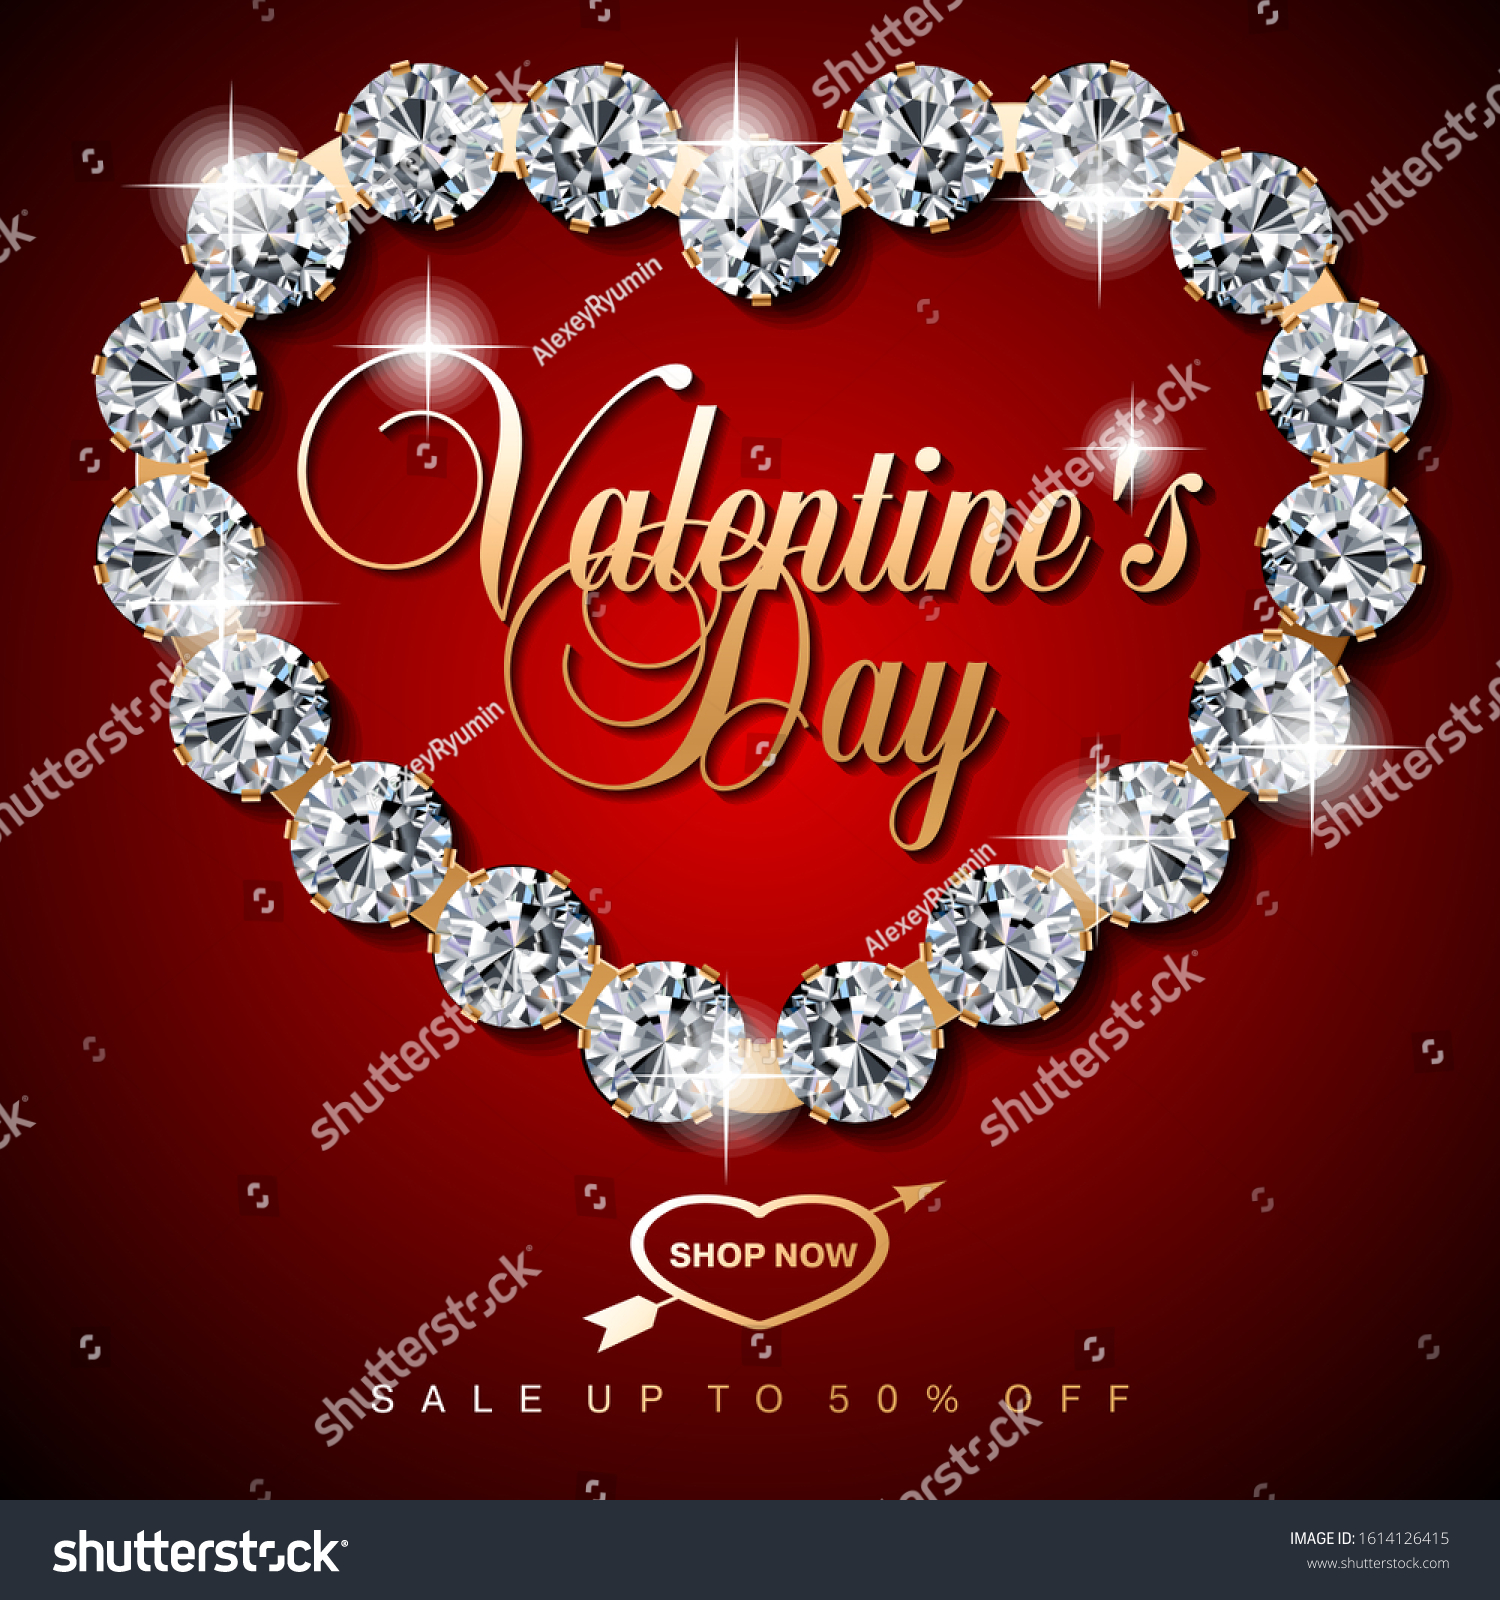 Luxury Valentines Day jewelry sale, special offer, discount, advertising campaign square vector banner, flyer, poster, voucher, social media post template with gold jewelry, diamonds and text on dark red background 